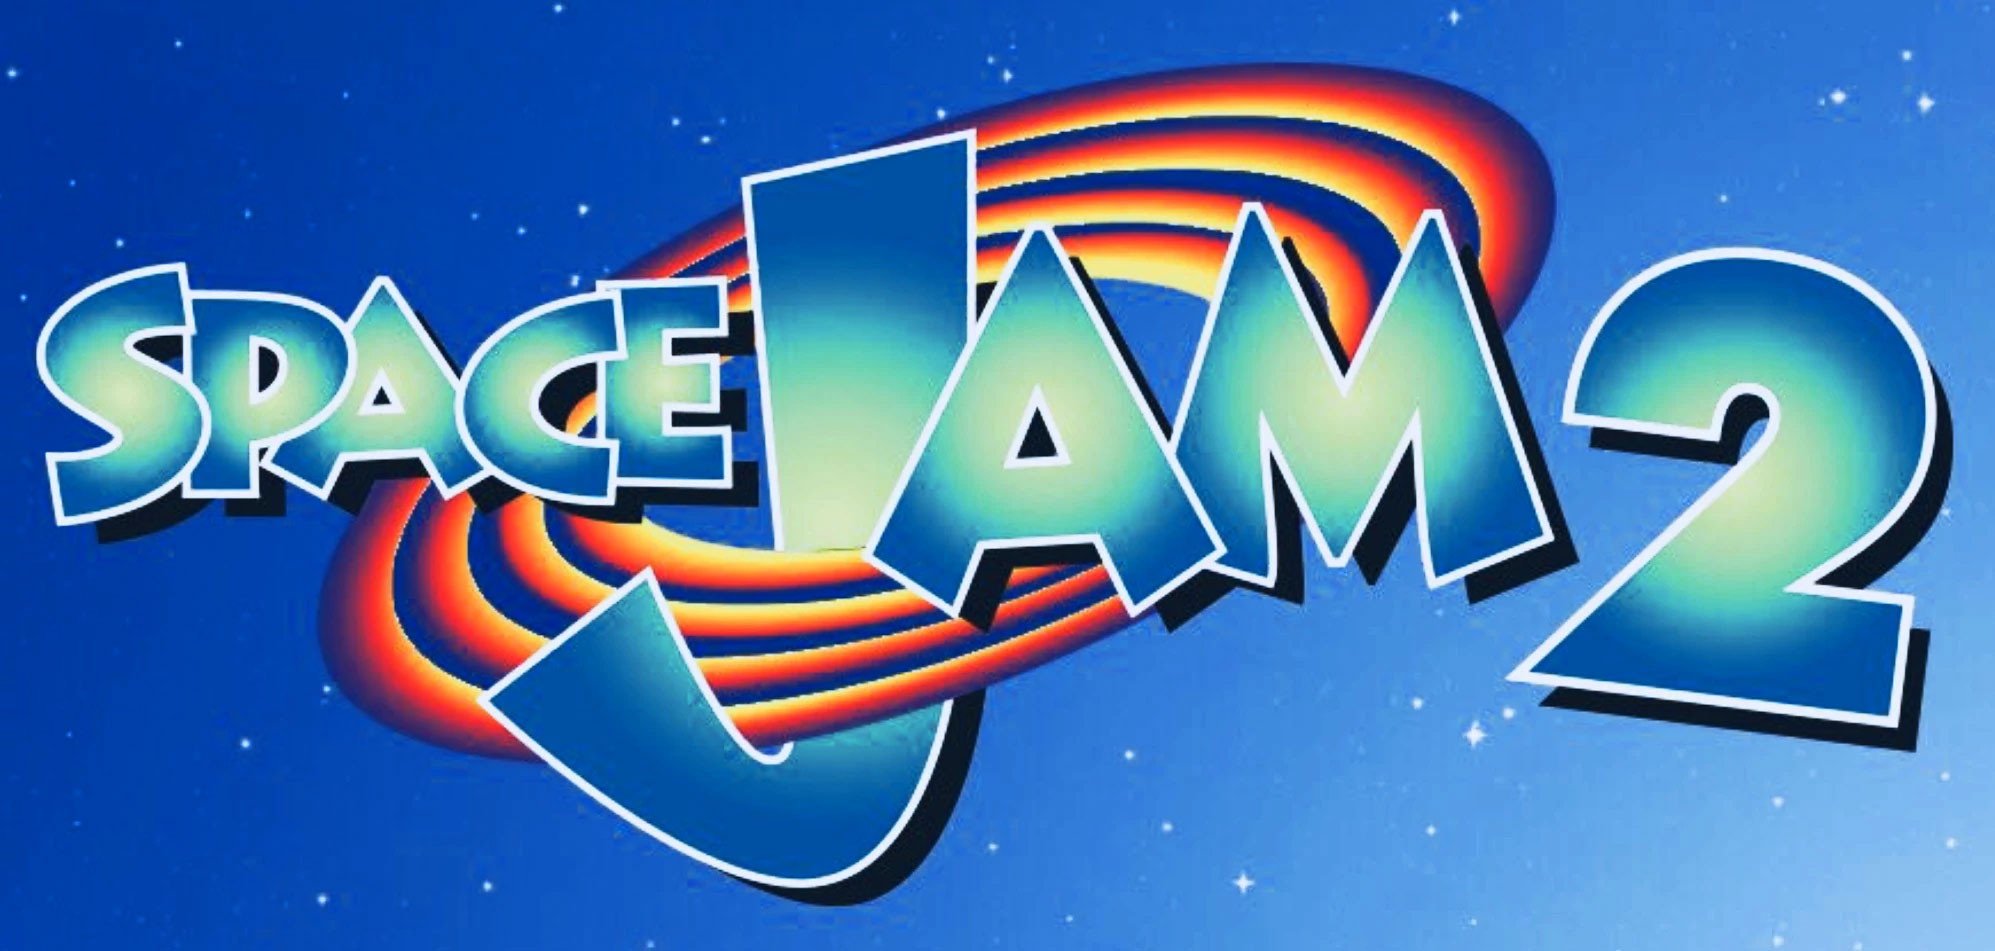 Sequel Bits: Space Jam Saw Ghostbusters Coming 2 America